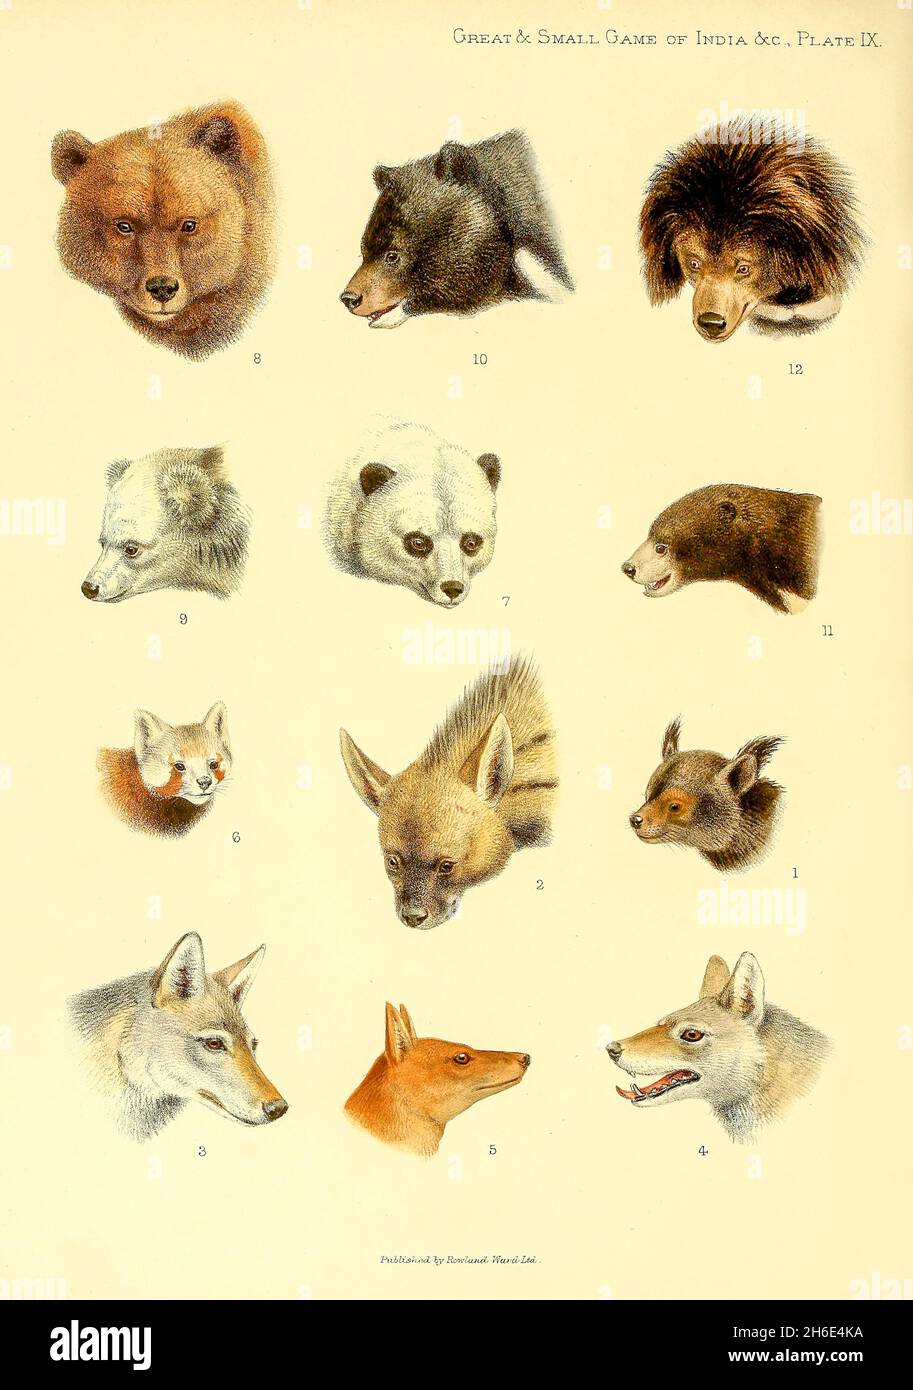 PLATE 9 1. Binturong, 2. Striped Hyaena,  3. Tibetan Wolf, 4. Indian Wolf, 5. Wild Dog, 6. Himalayan Panda, 7. Short-tailed Panda, 8.Himalayan Brown Bear, 9. Tibetan Blue Bear, 10. Himalayan Black Bear, 11. Malay Bear, 12. Sloth-Bear, from the book ' The great and small game of India, Burma, & Tibet ' by Richard Lydekker, Published in London by R. Ward in 1900 Stock Photo